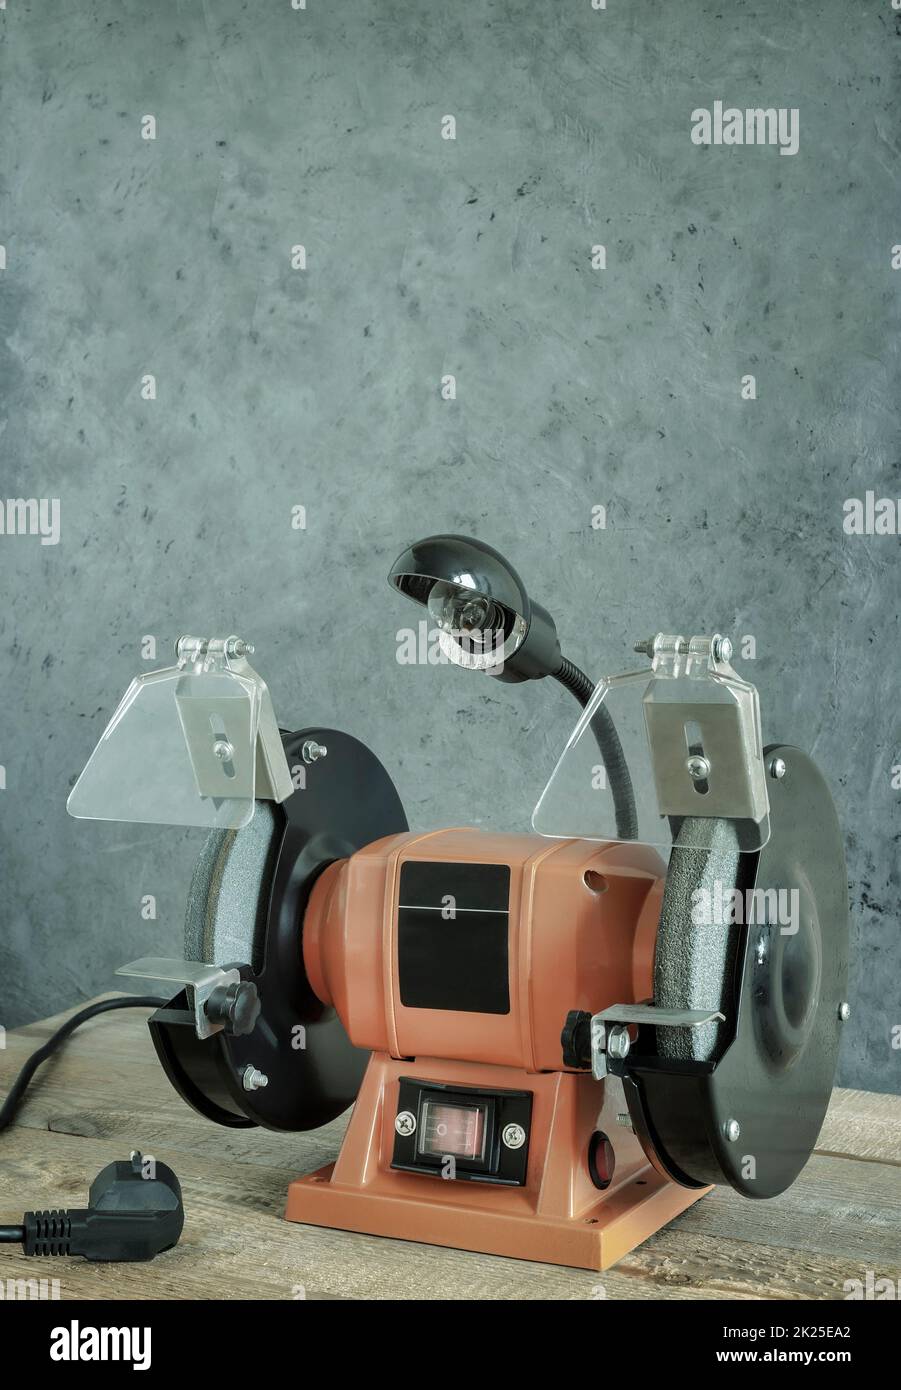 A small sharpening machine for sharpening various tools Stock Photo